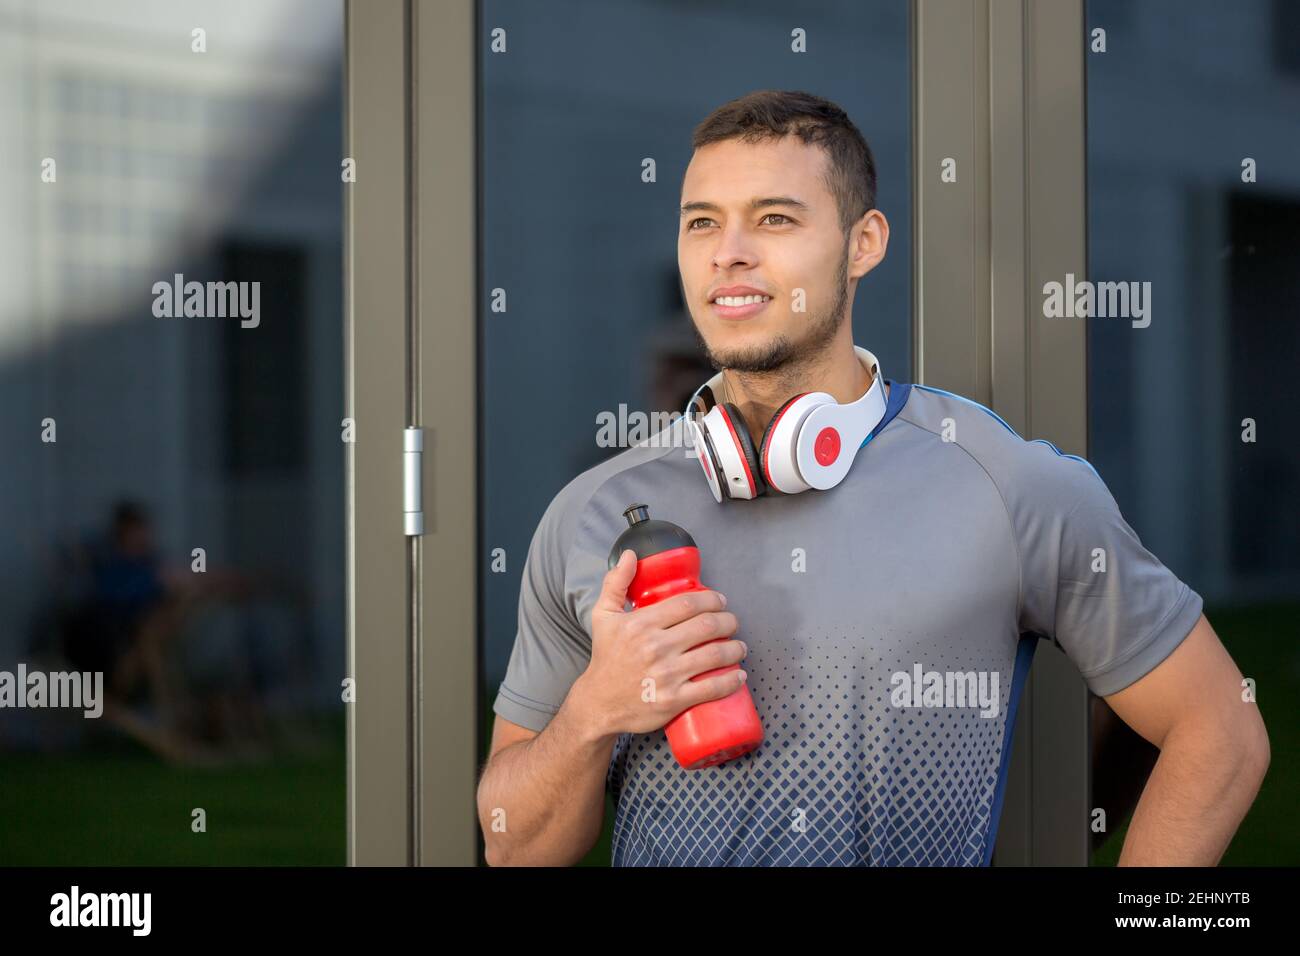 Young man looking up into the future runner outdoor sports fitness training outside Stock Photo